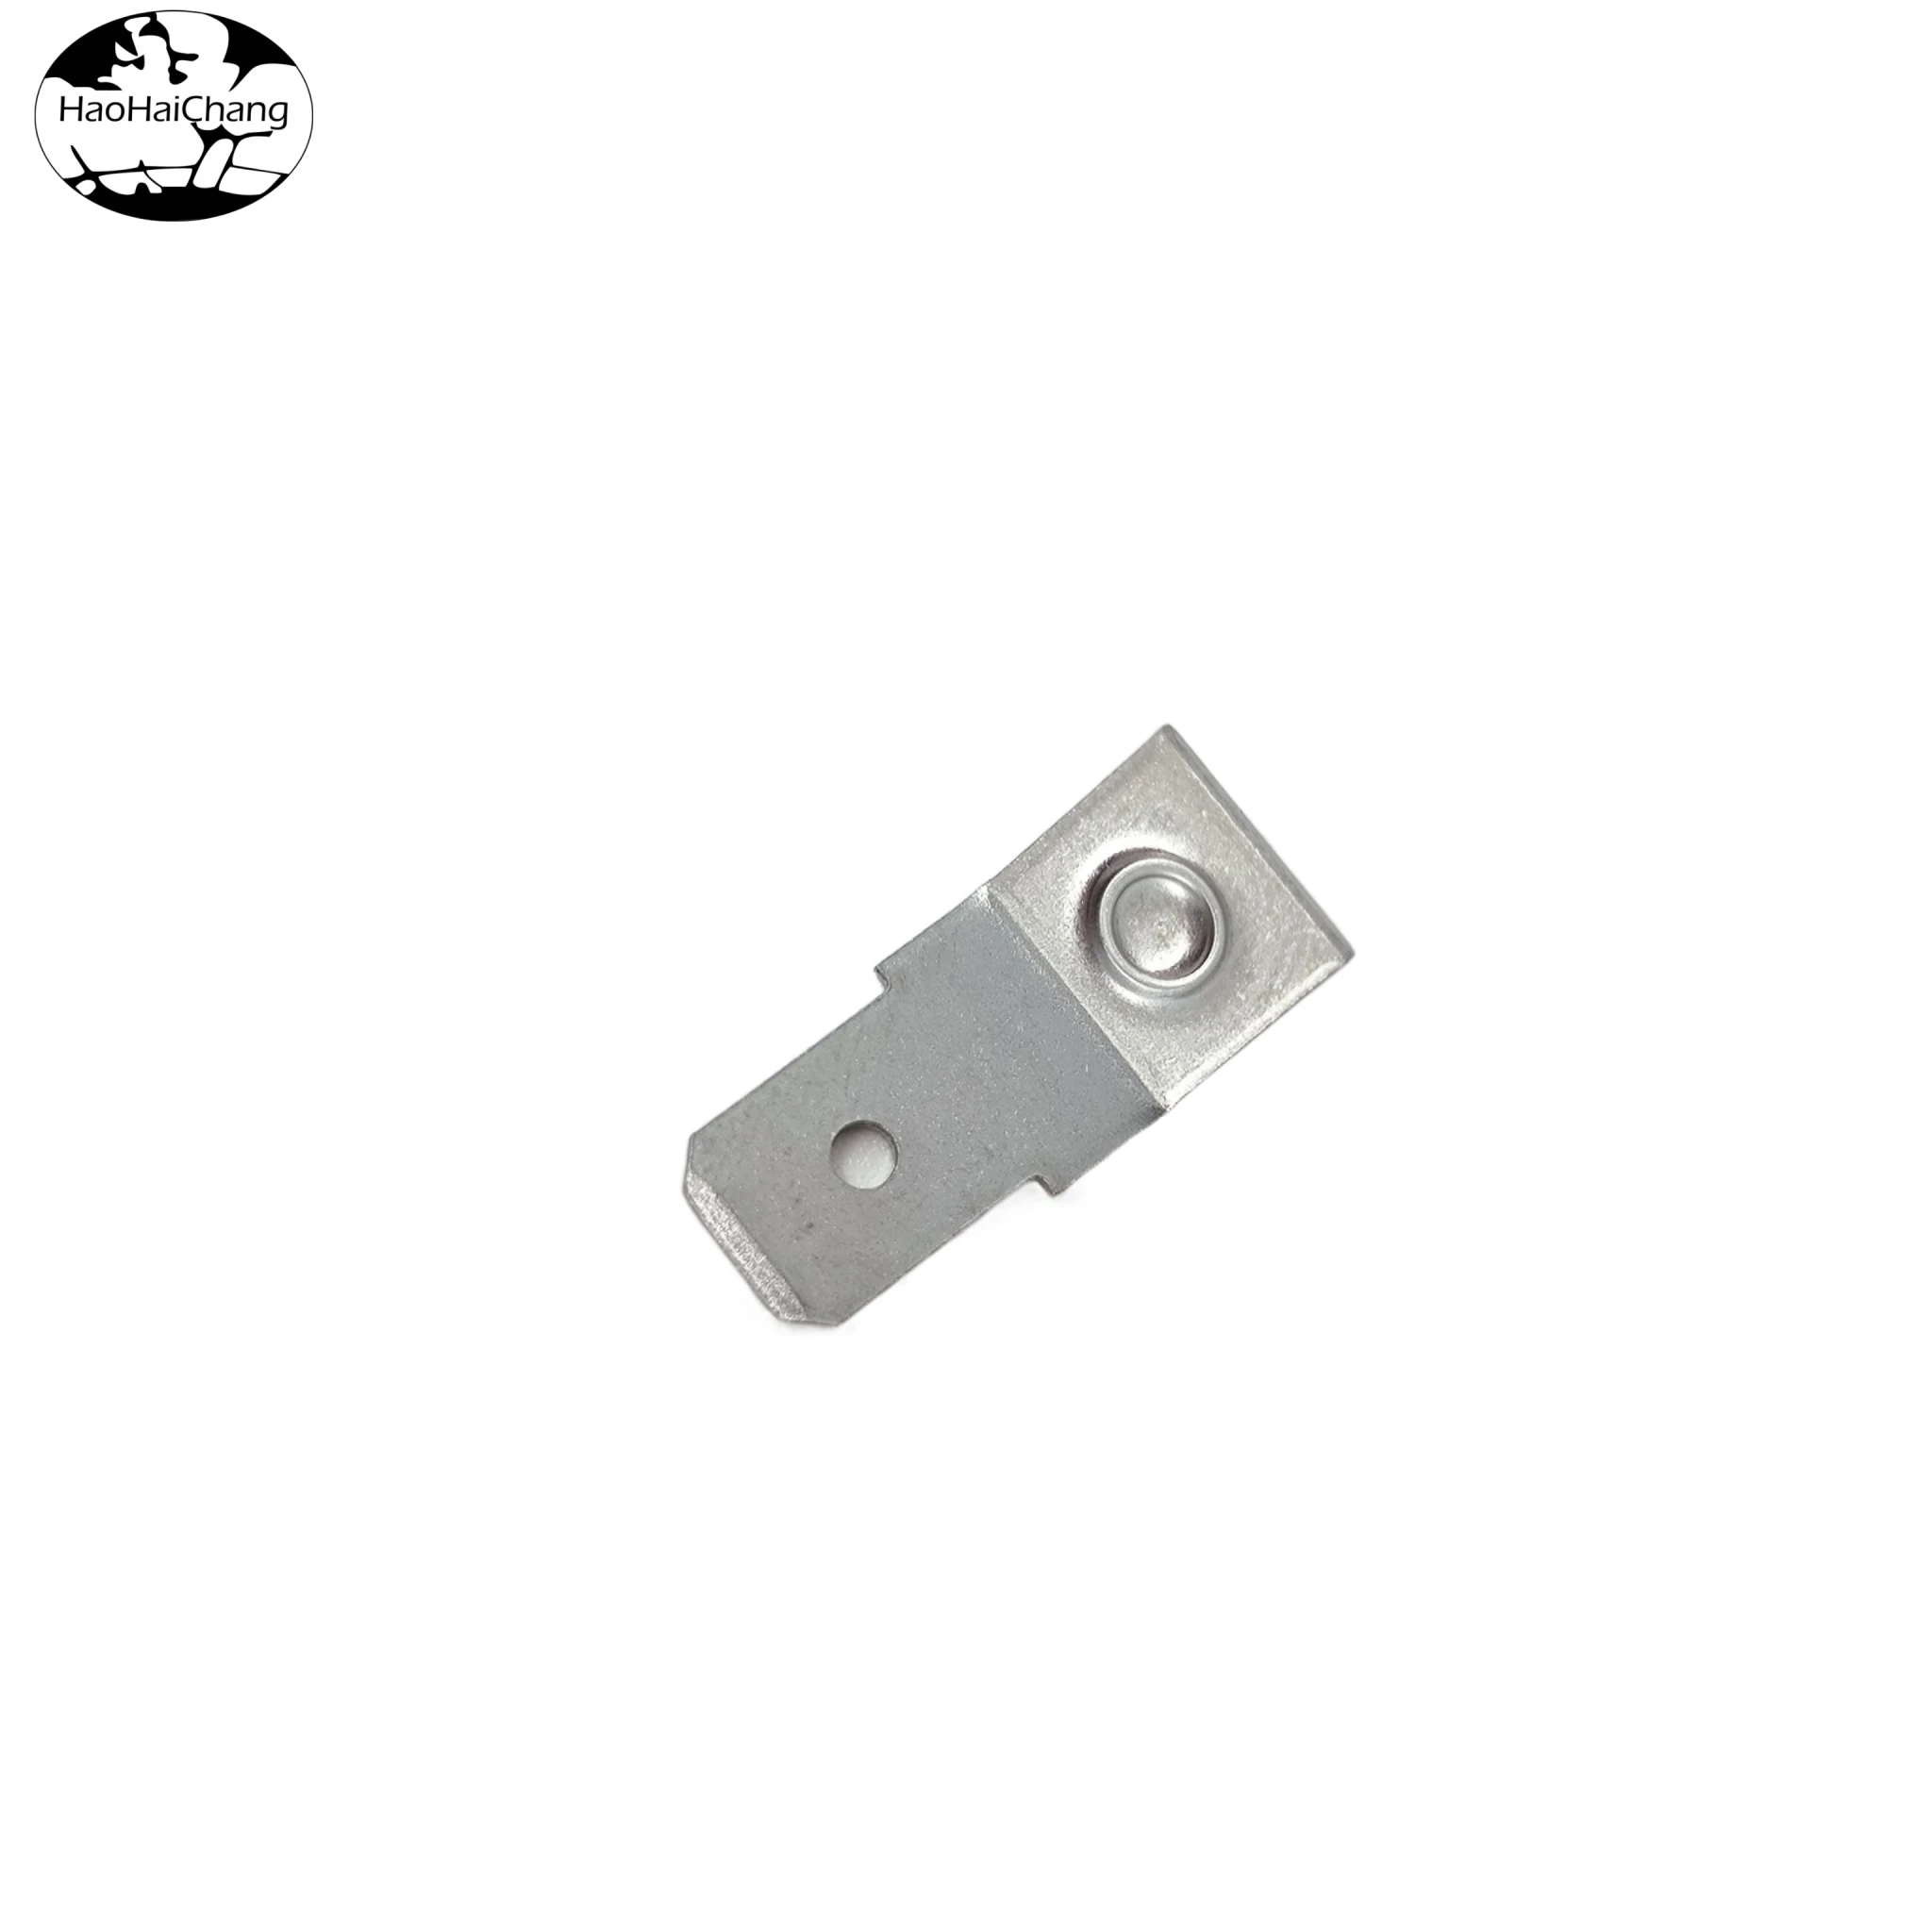 HHC-0278 Connector